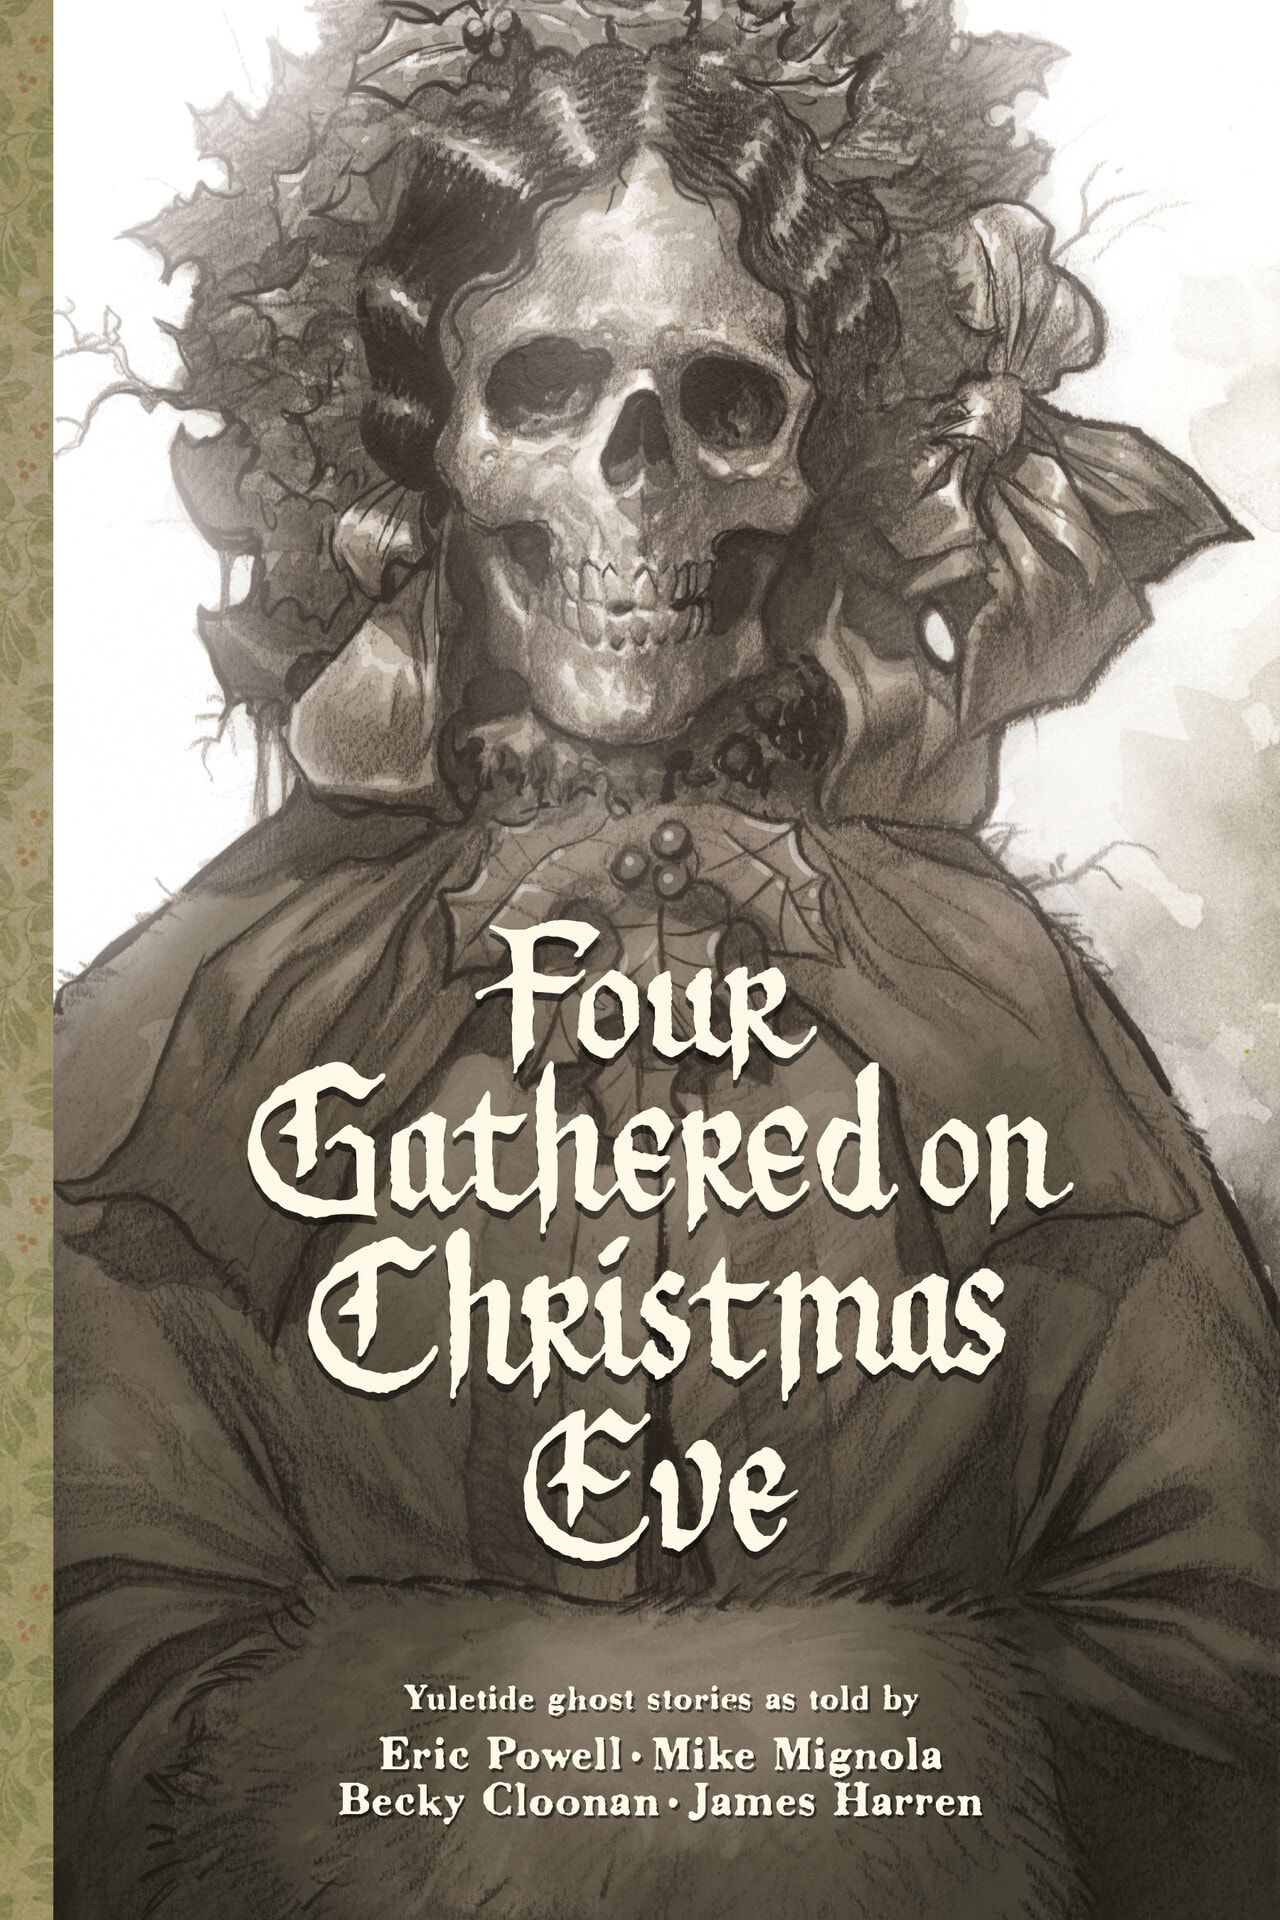 Four Gathered on Christmas Eve Cover A